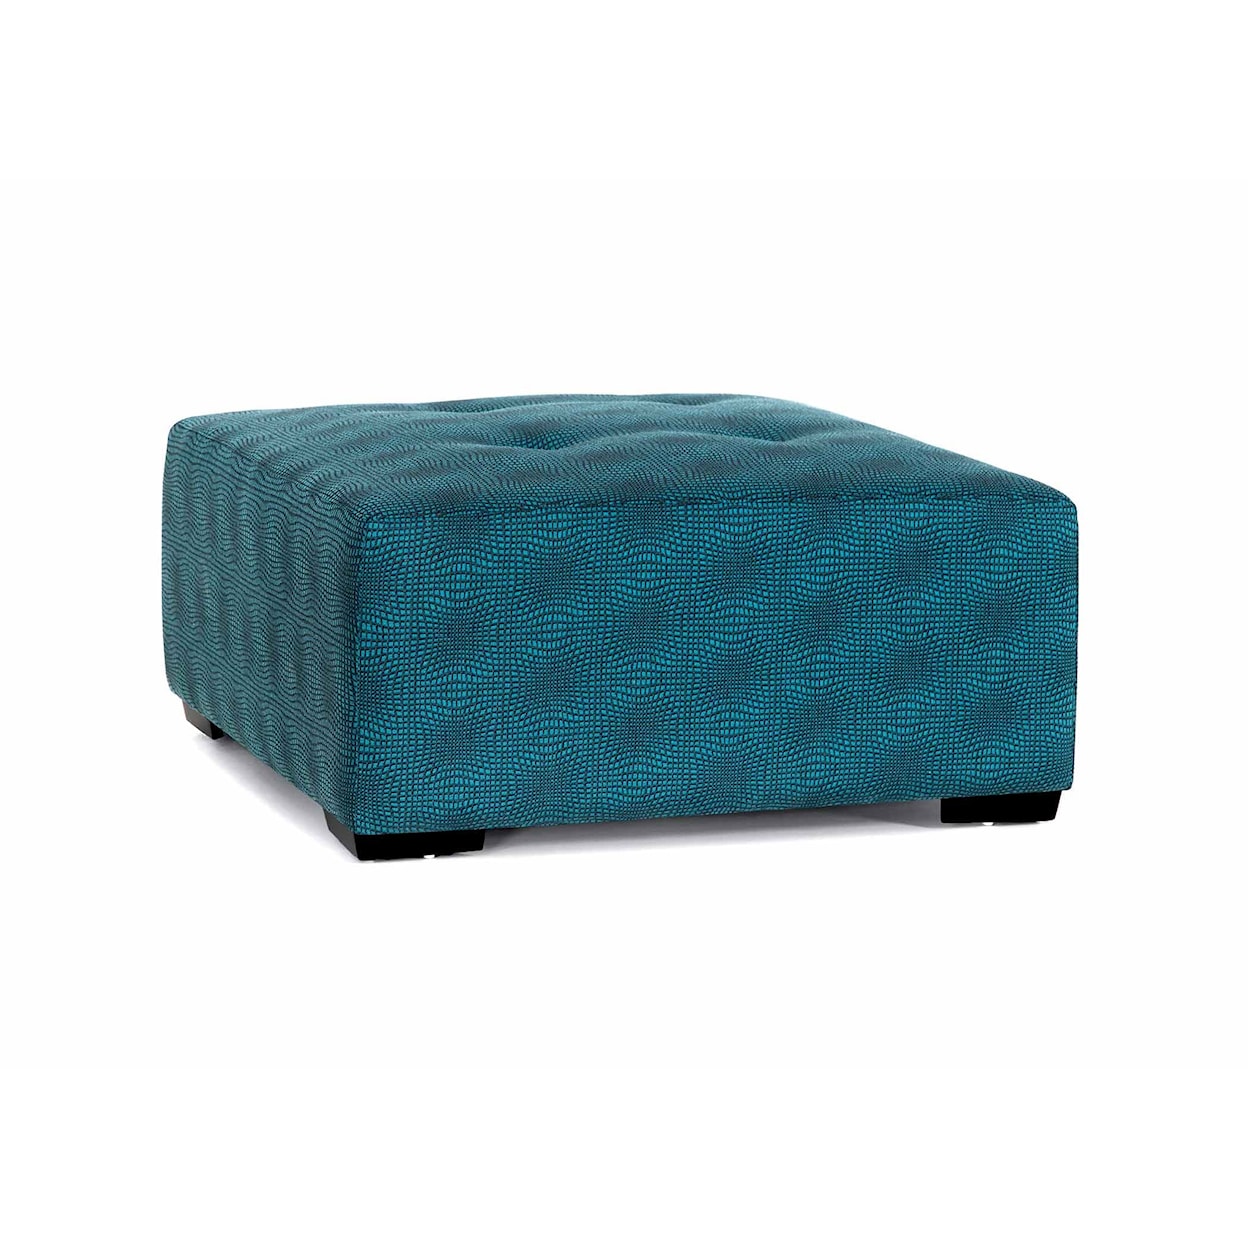 Franklin 892 Paradigm Square Ottoman with Tufting